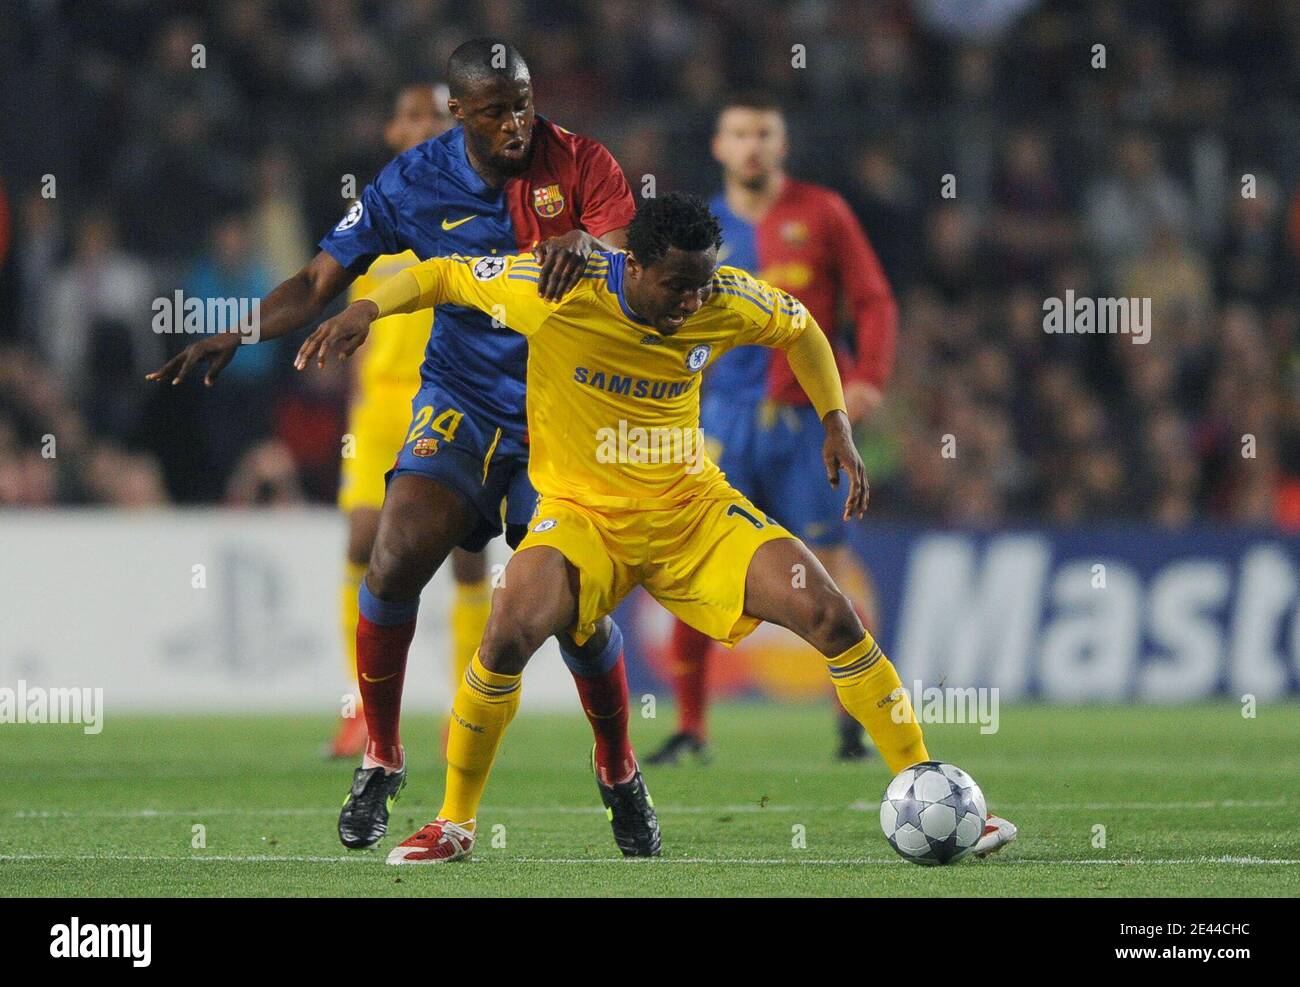 Chelsea's John Mikel Obi challenges FC Barcelona's Gnegneri Yaya Toure during the UEFA Champions League, Semi Final, First Leg, Barcelona vs Chelsea at the Nou Camp stadium in Barcelona, Spain on April 28, 2009. The match ended in a 20-0 draw. Photo by Steeve McMay/ABACAPRESS.COM Stock Photo